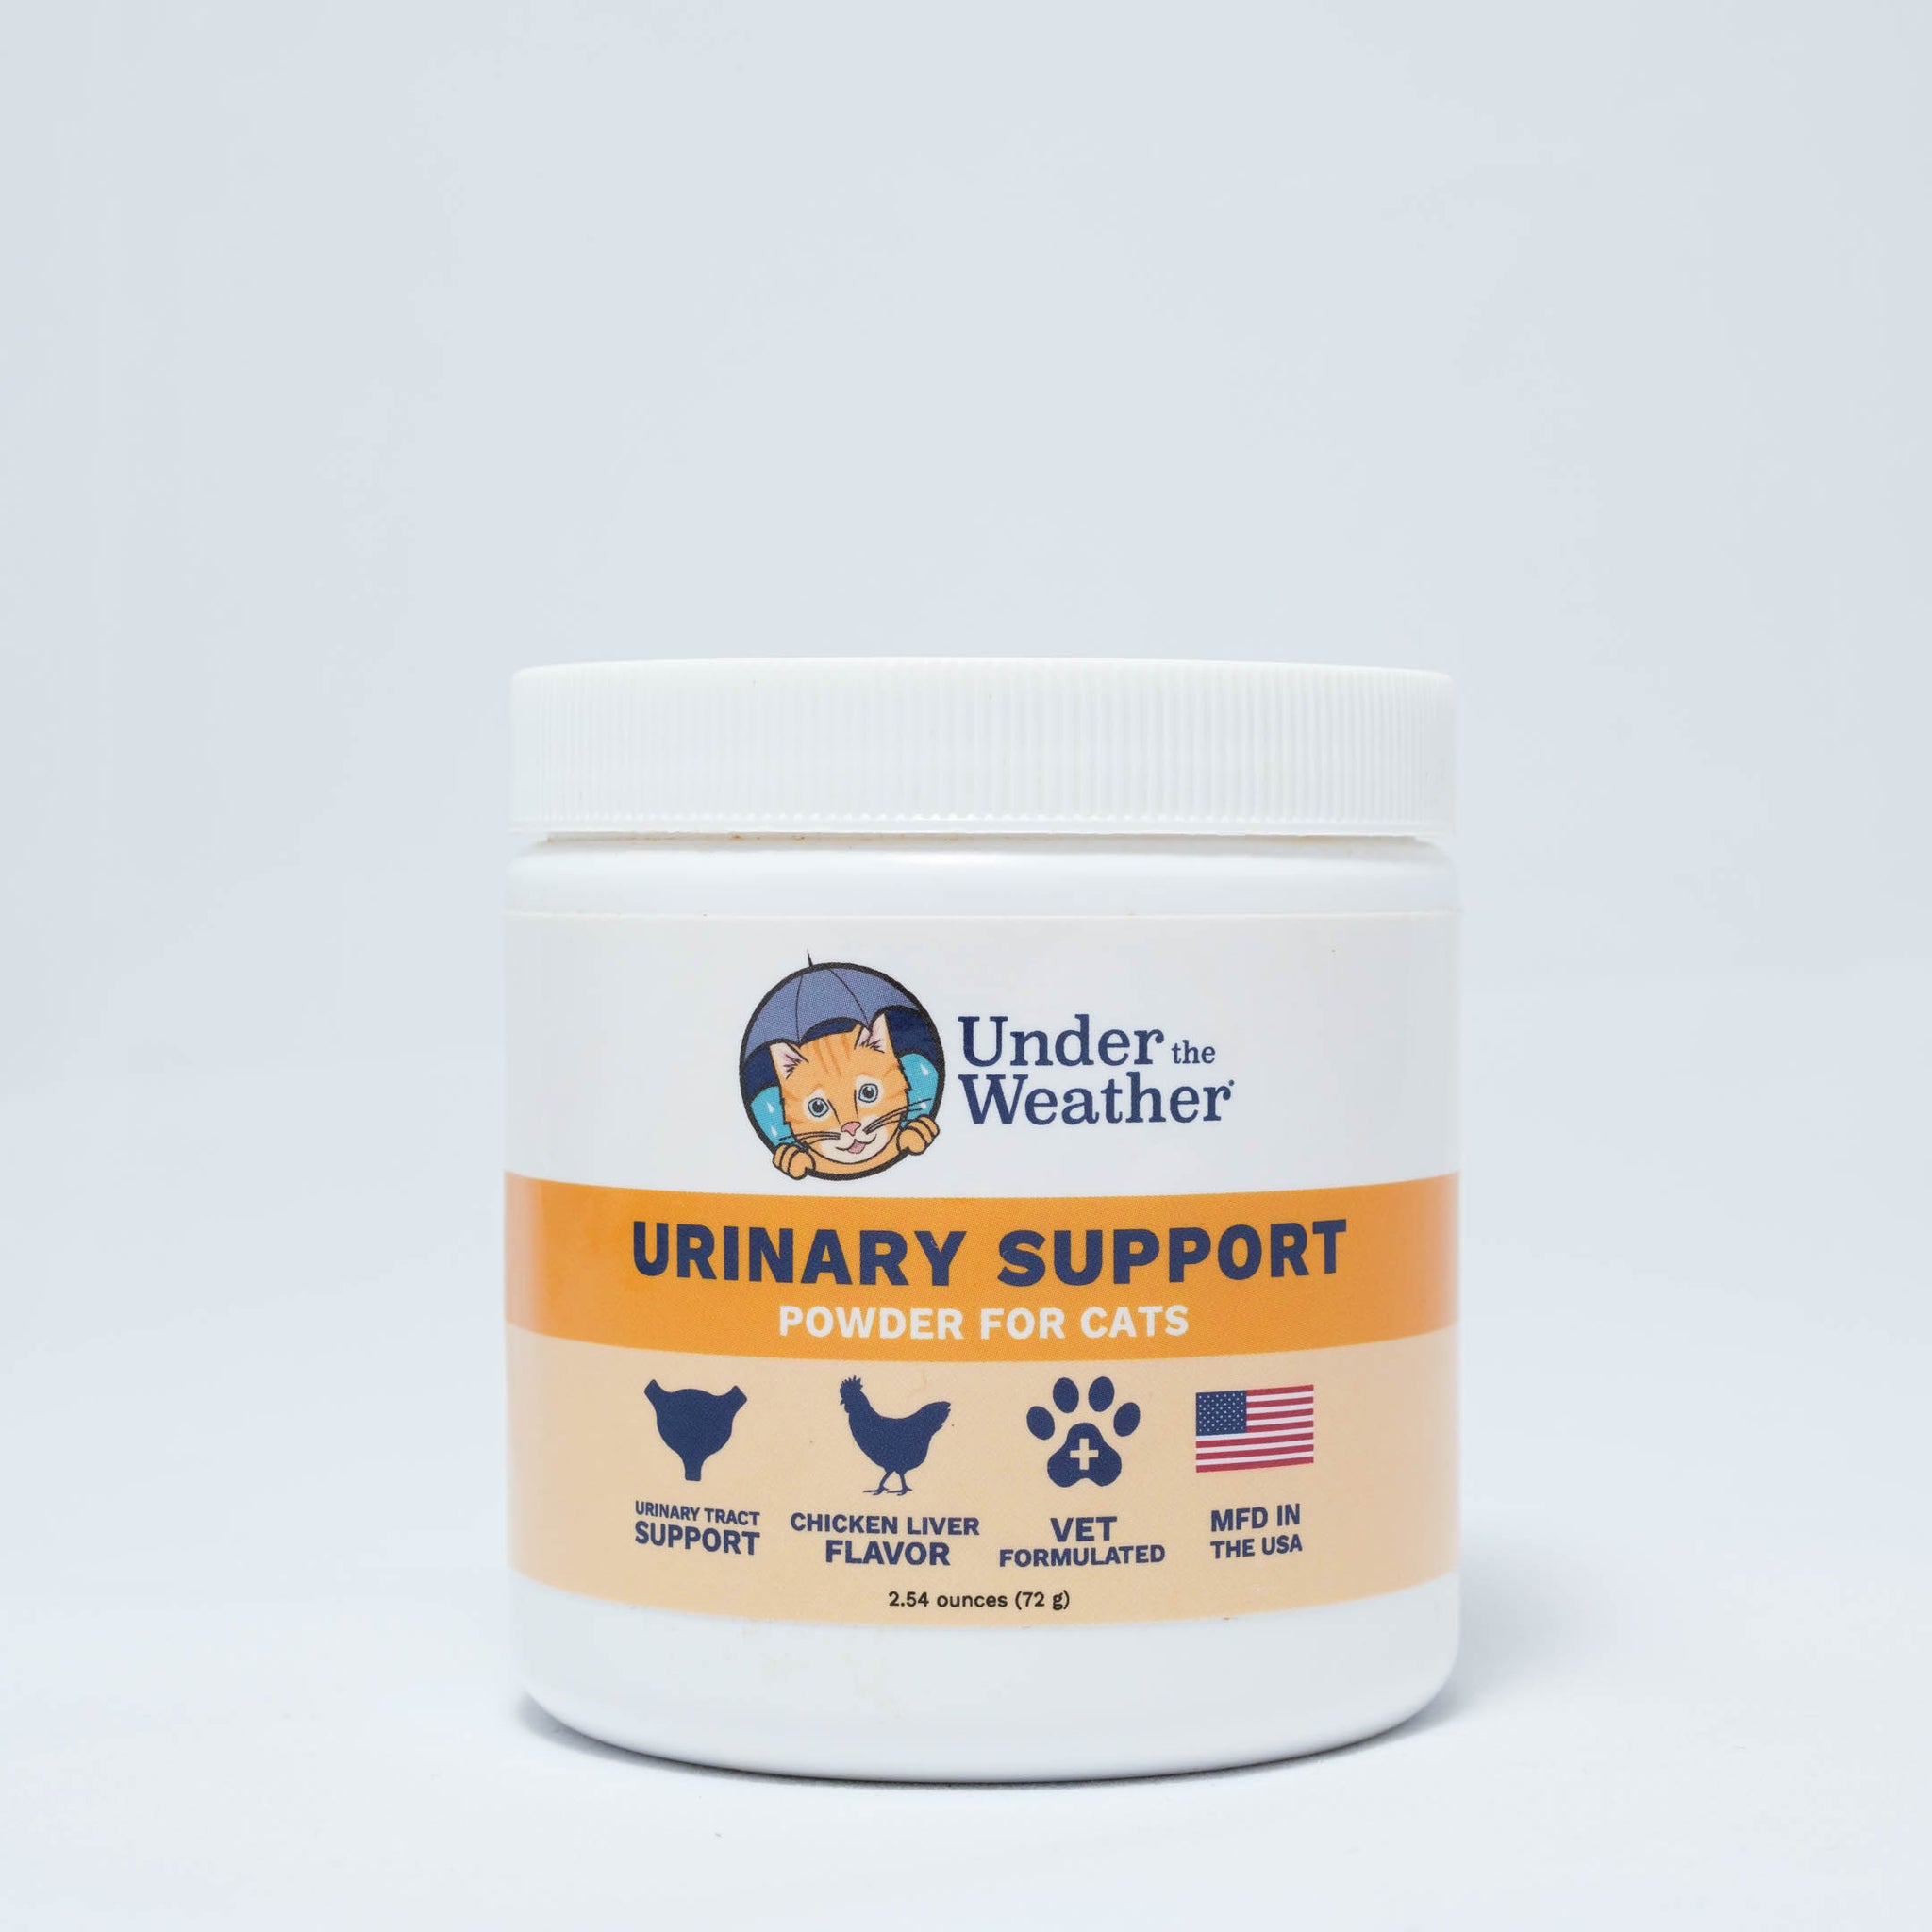 Urinary Support Powder for Cats